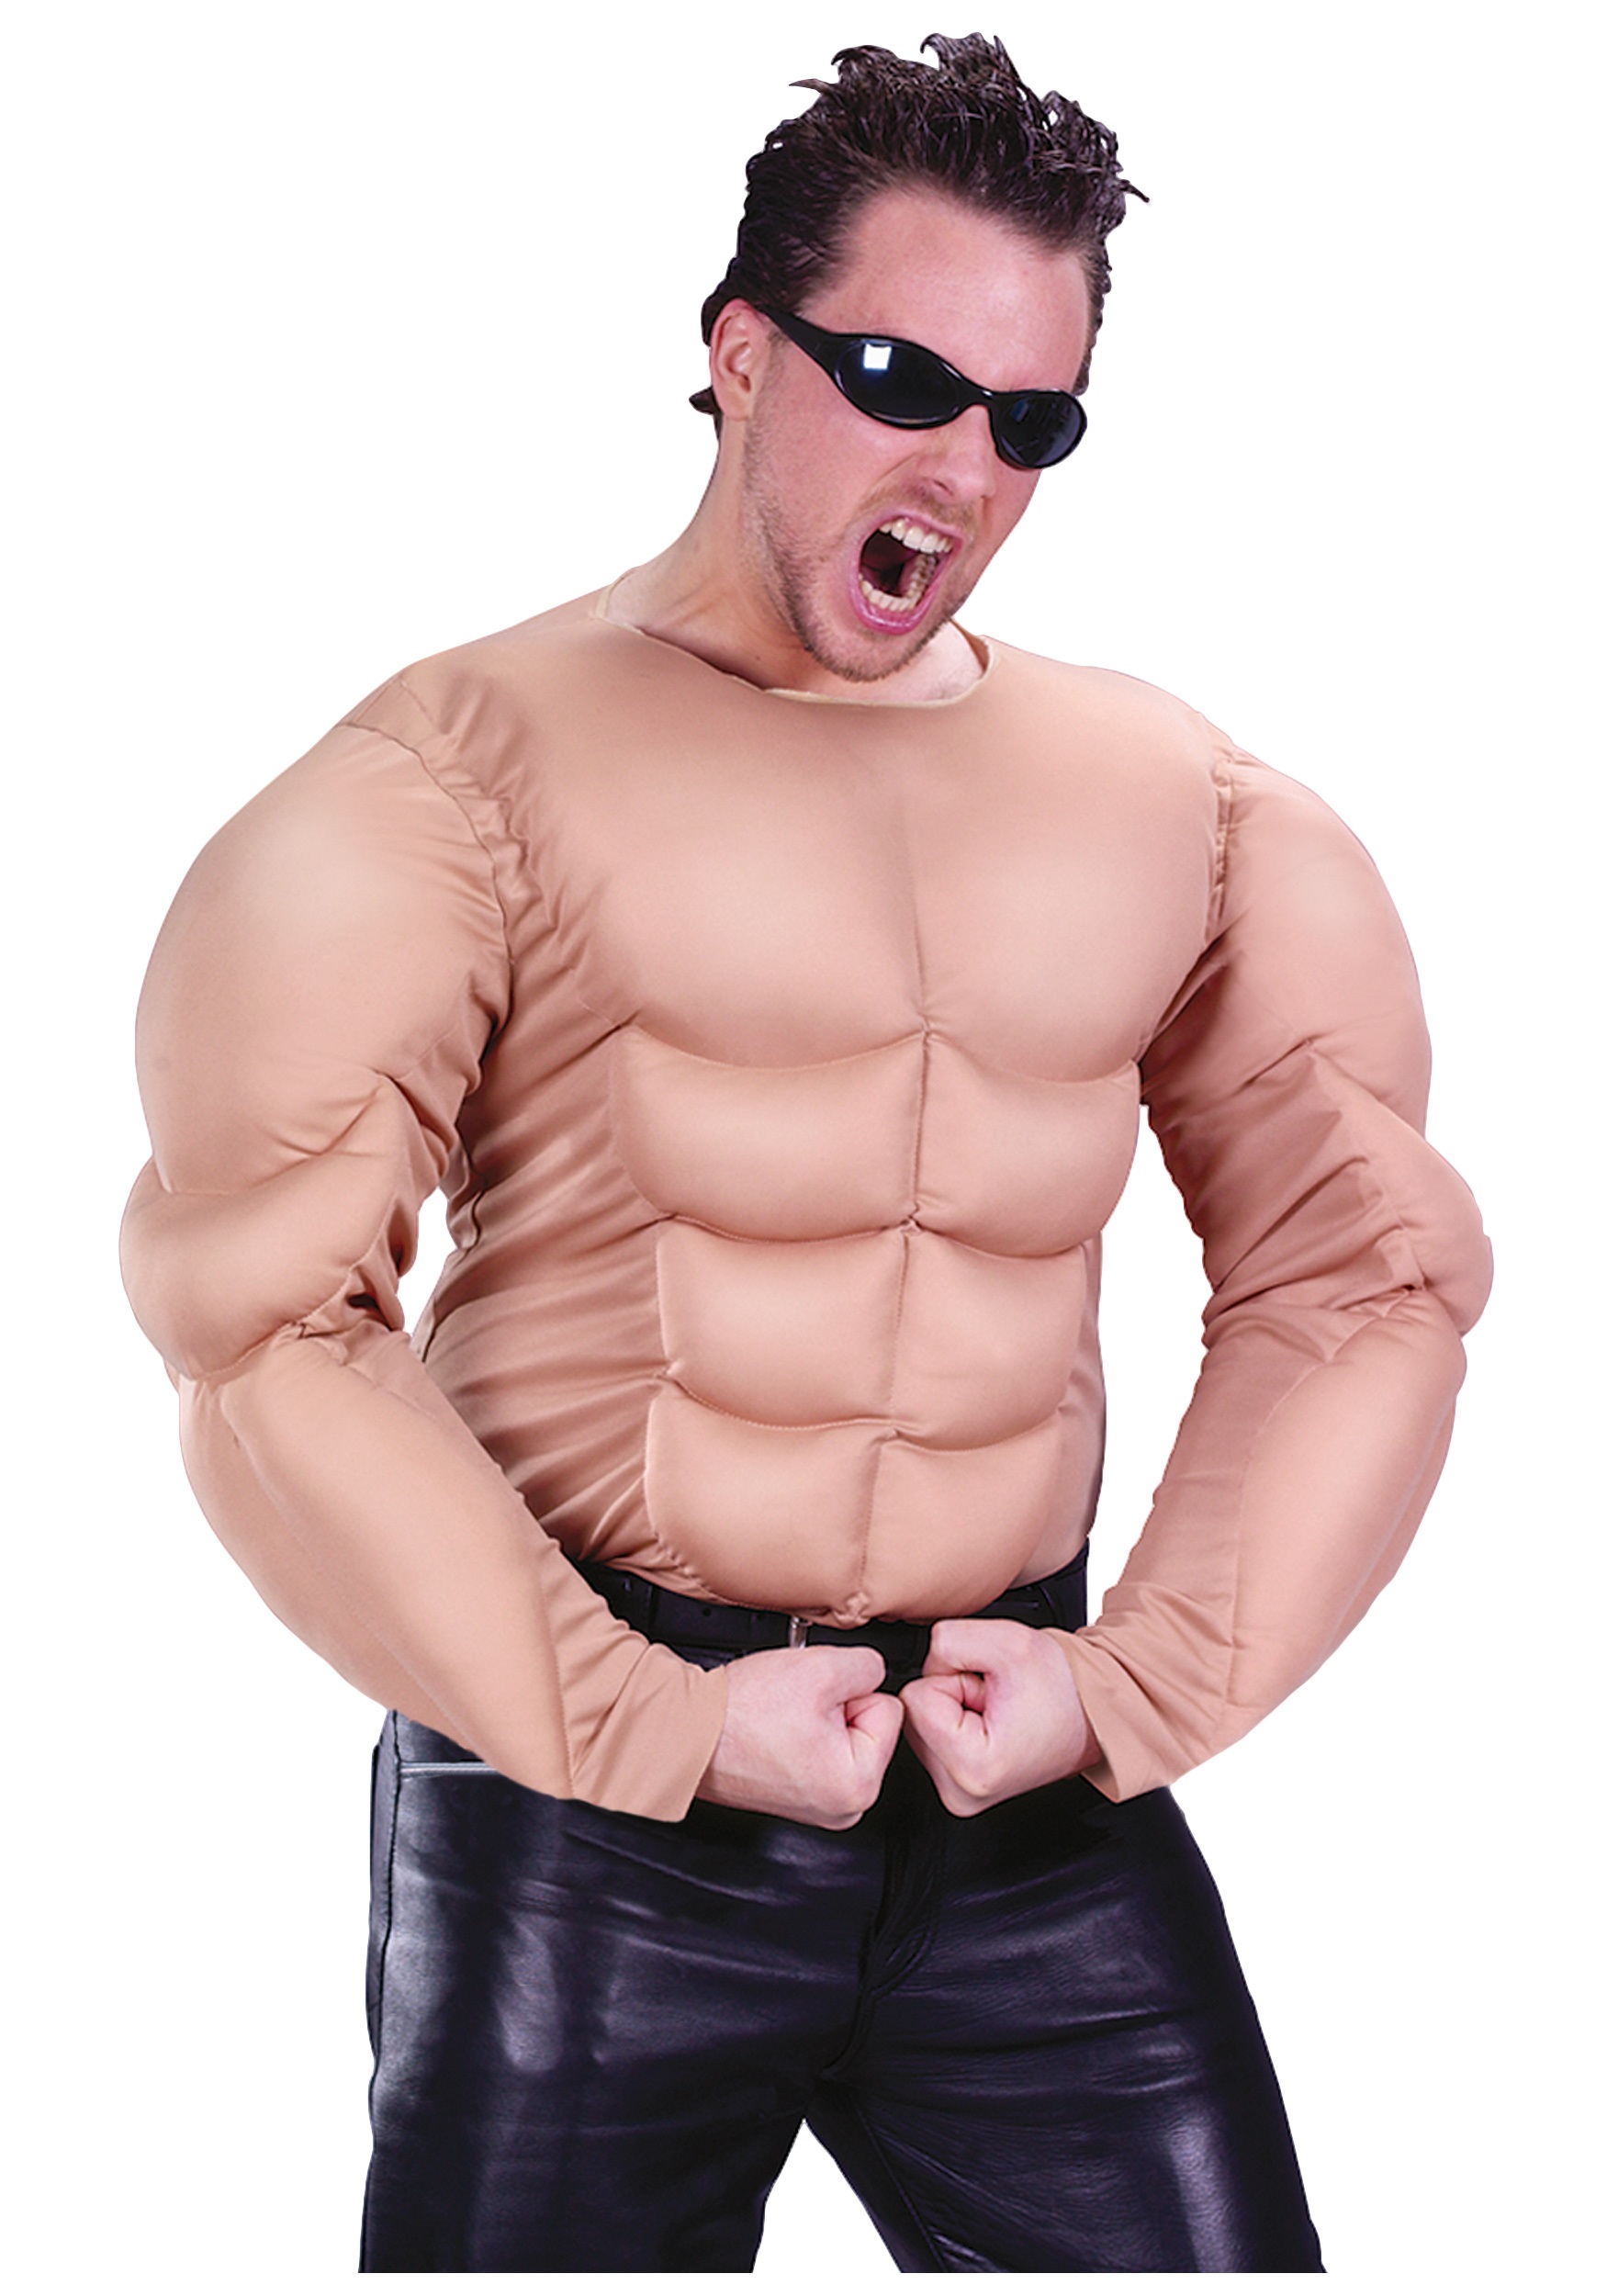 Guy Wearing Funny Muscle Costume Picture